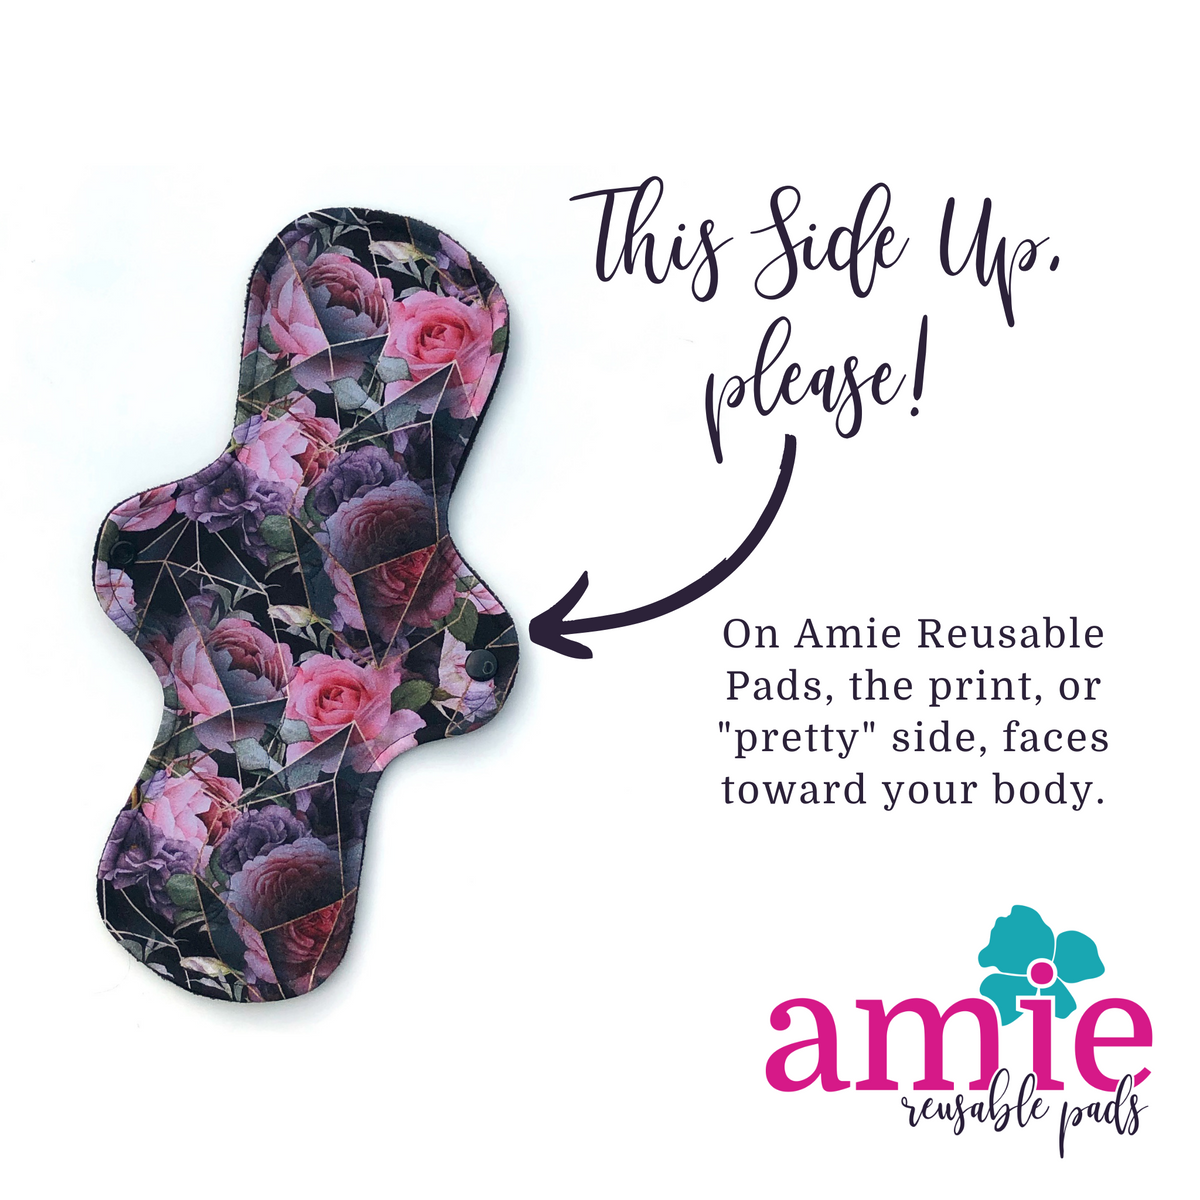 Instruction for showing the pretty-side faces up toward your body when using Amie reusable cloth pads